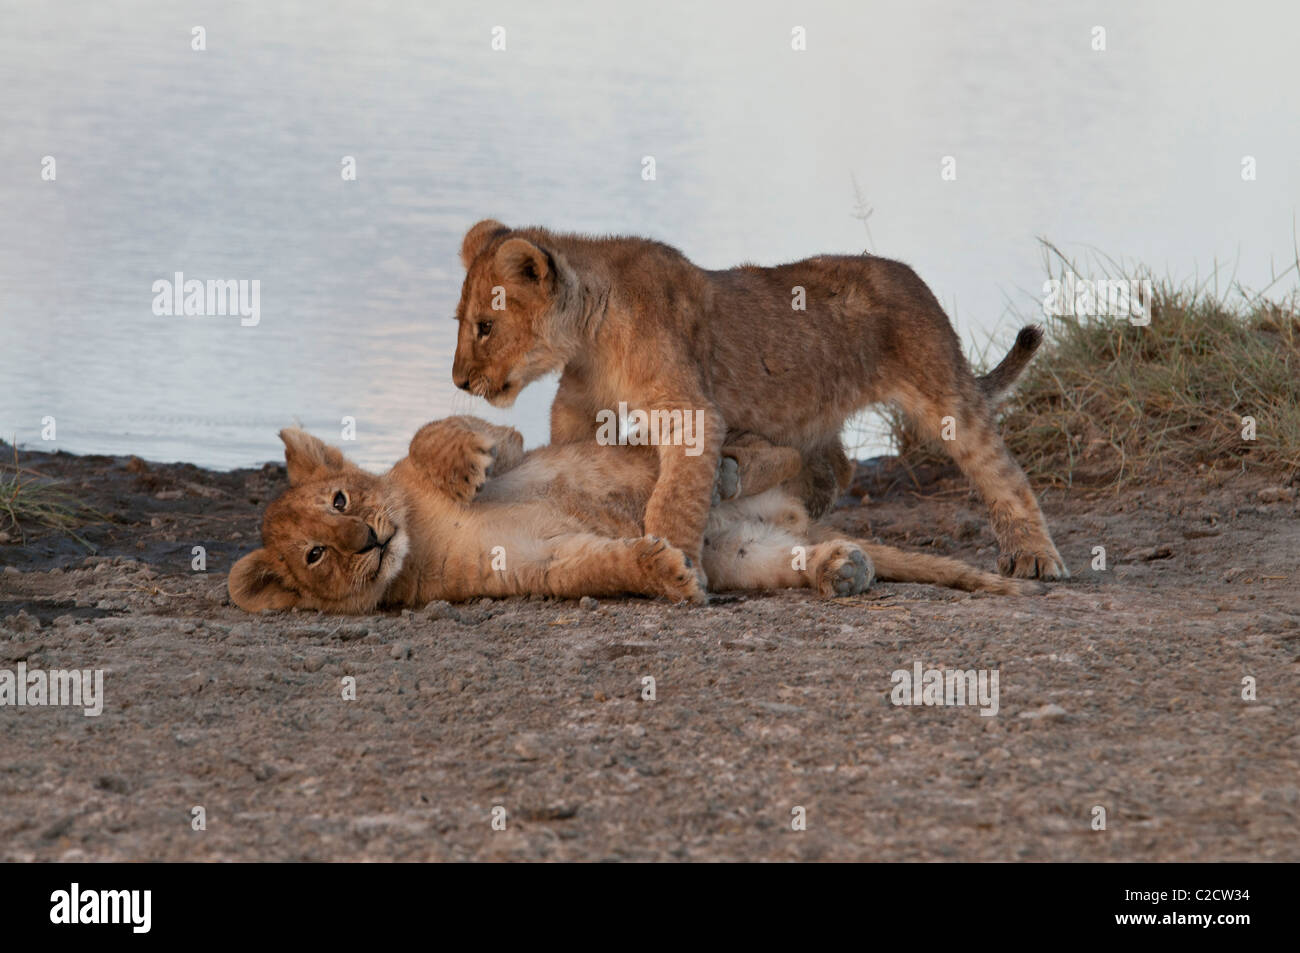 Stock photo of two lion cubs playing by the water. Stock Photo